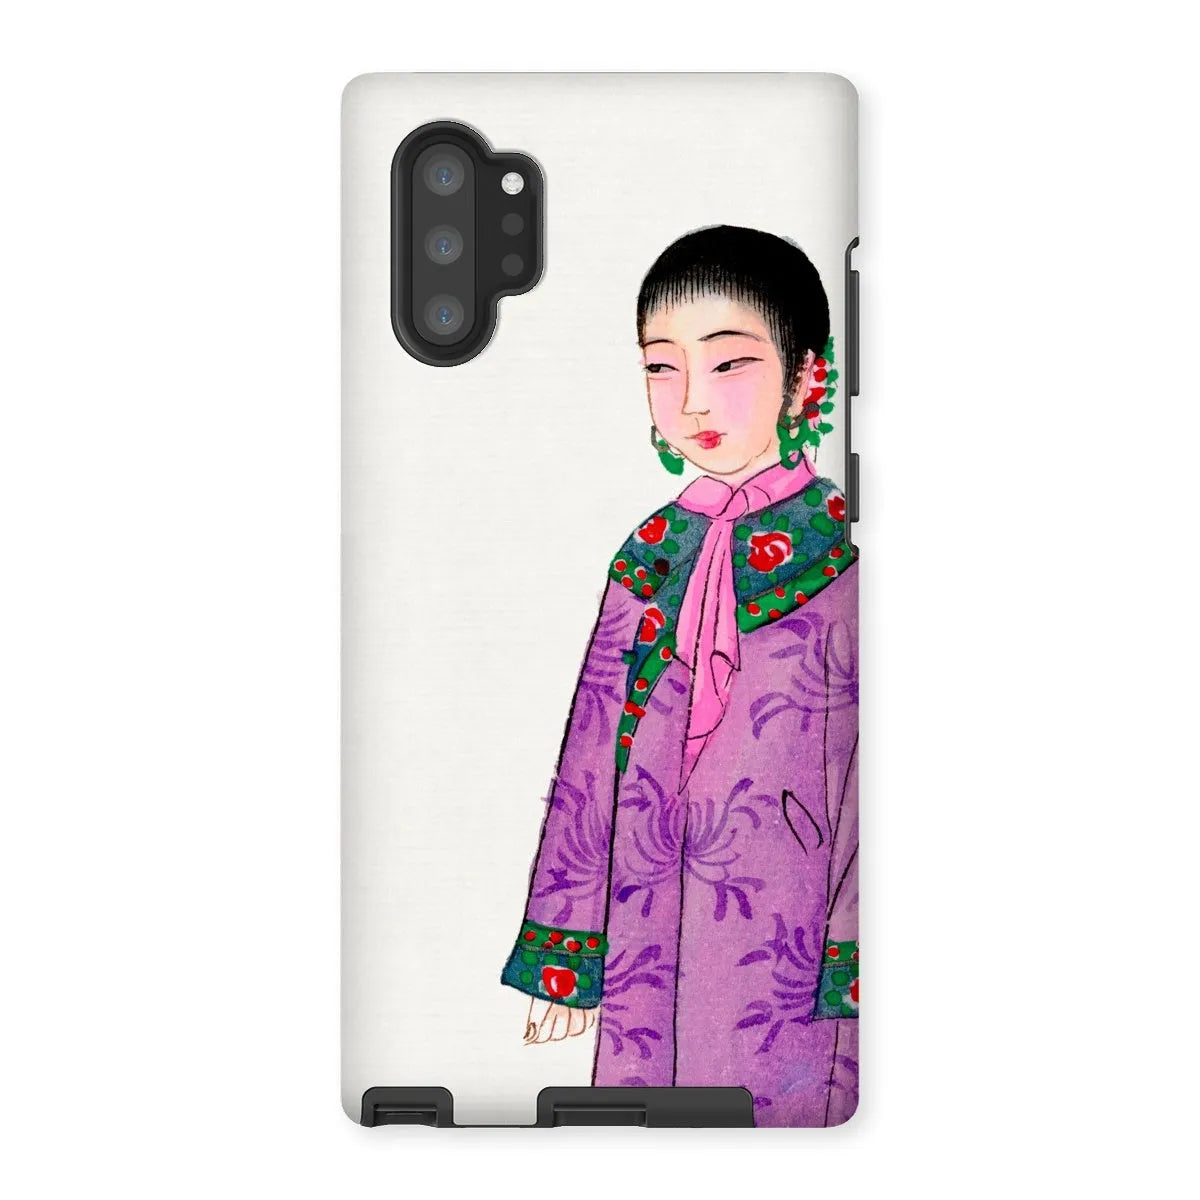 Manchu Noblewoman - Chinese Aesthetic Art Phone Case - Samsung Galaxy Note 10p / Matte - Mobile Phone Cases - Aesthetic